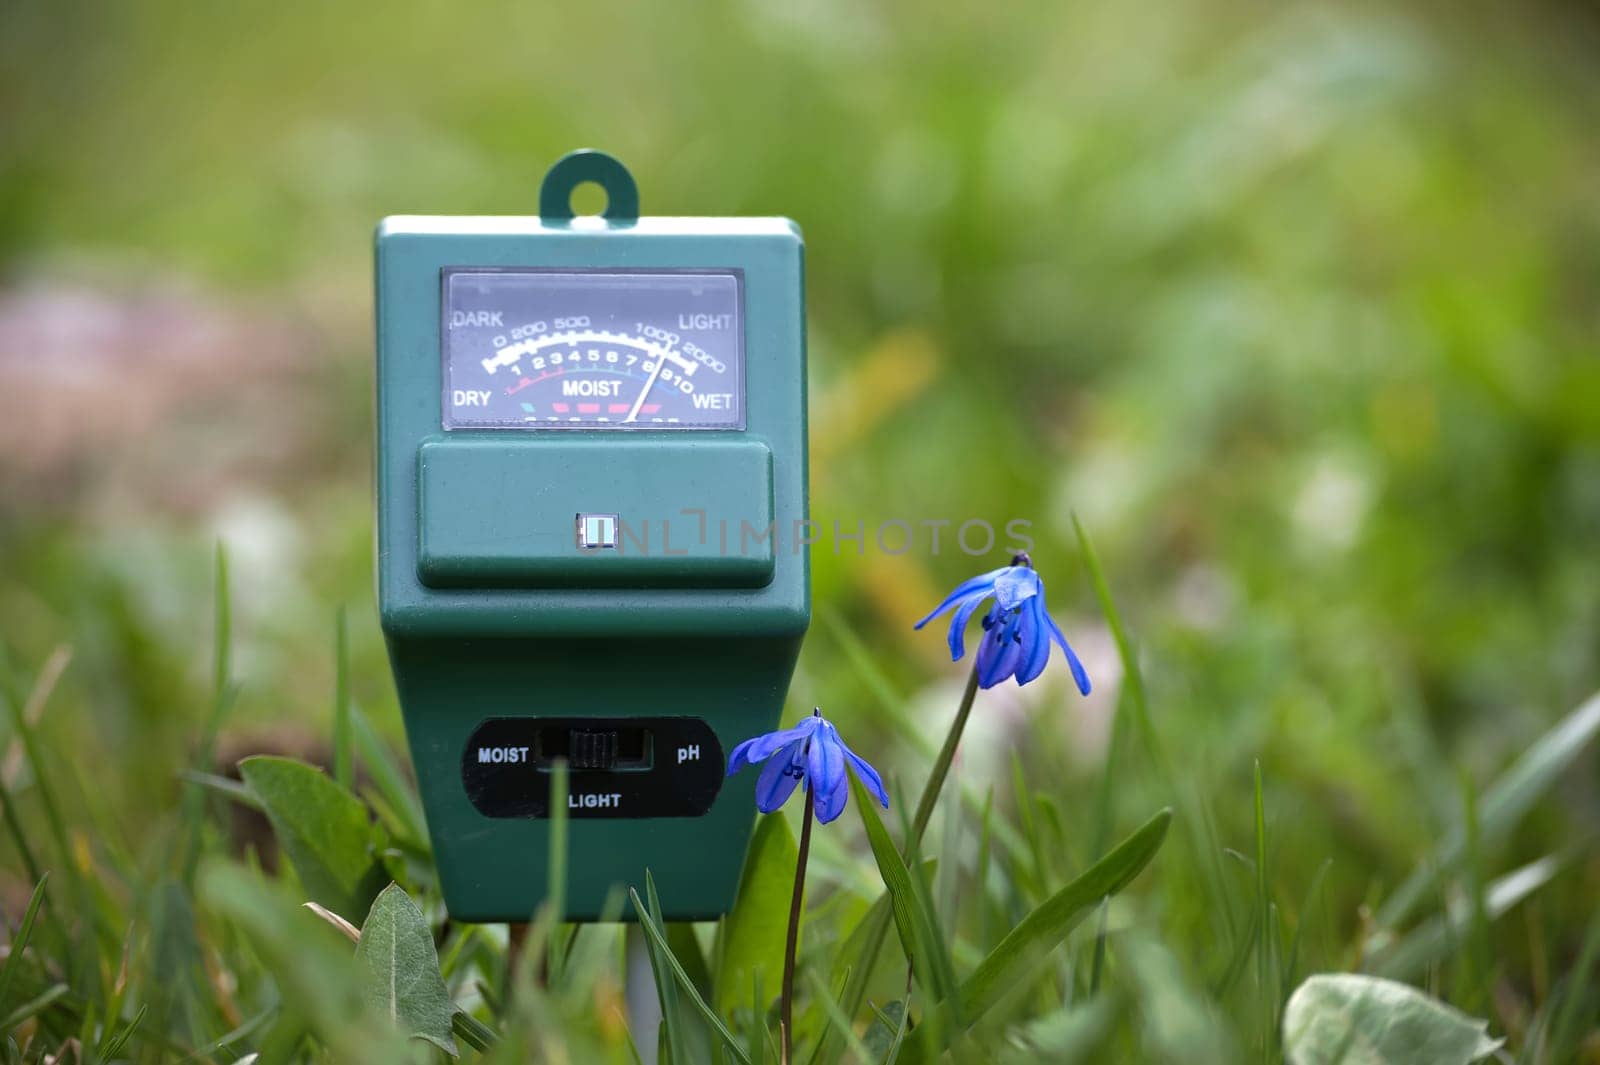 Green electronic soil moisture meter placed amidst natural surroundings on the grass accompanied by small blue flowers